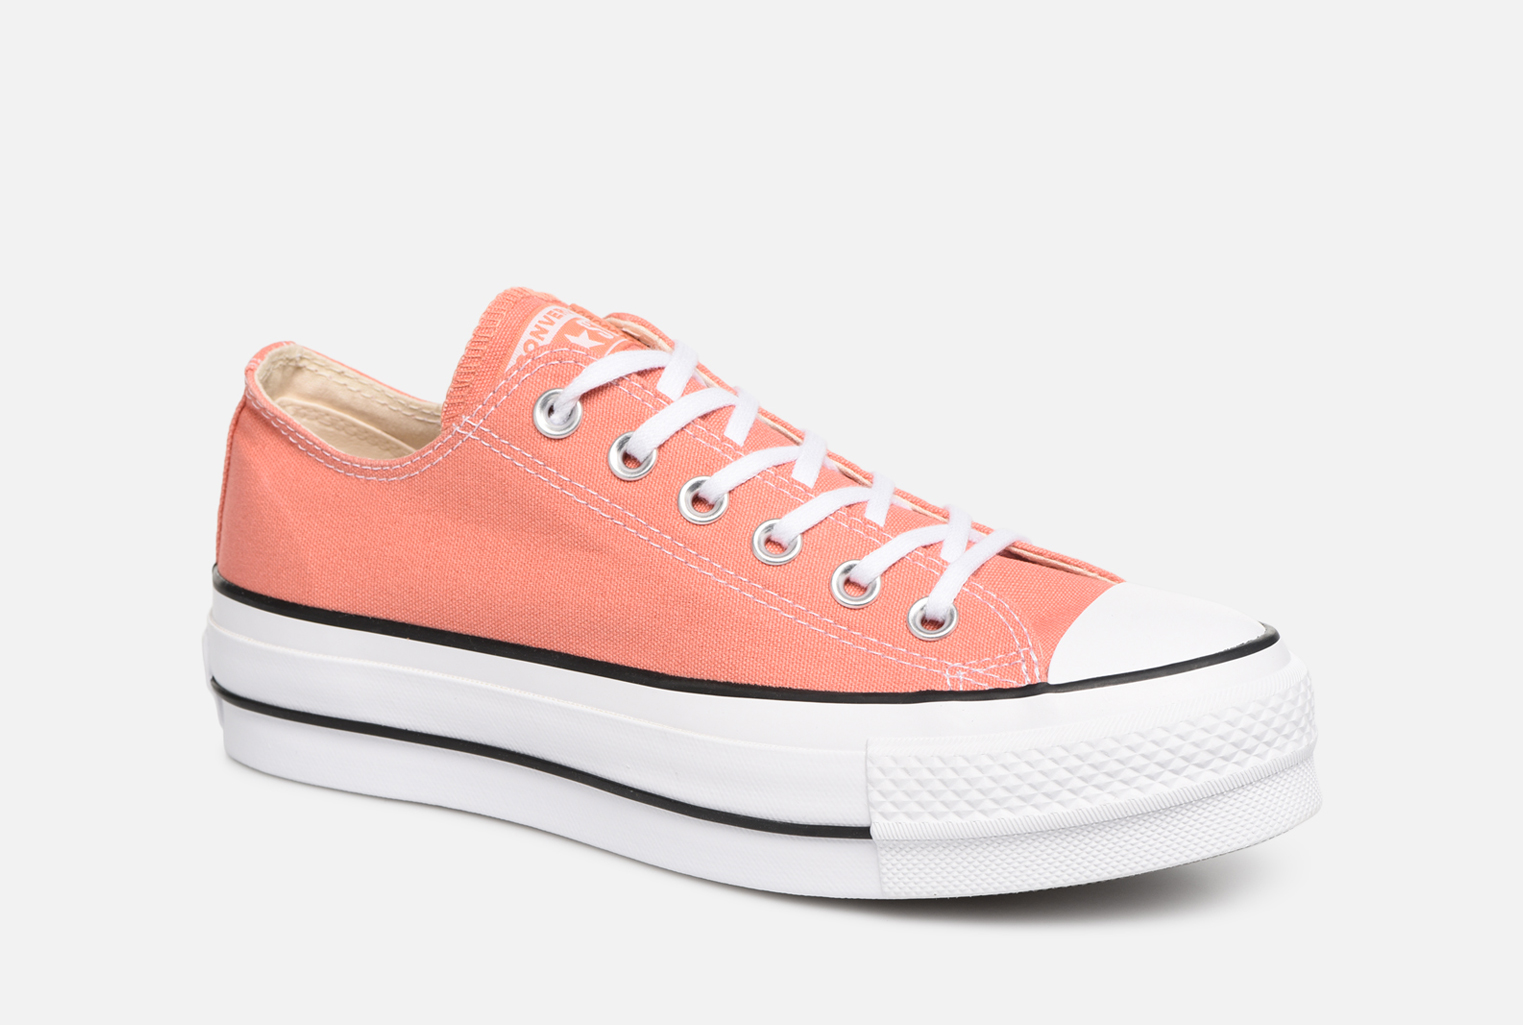 converse basse blanche femme magasin